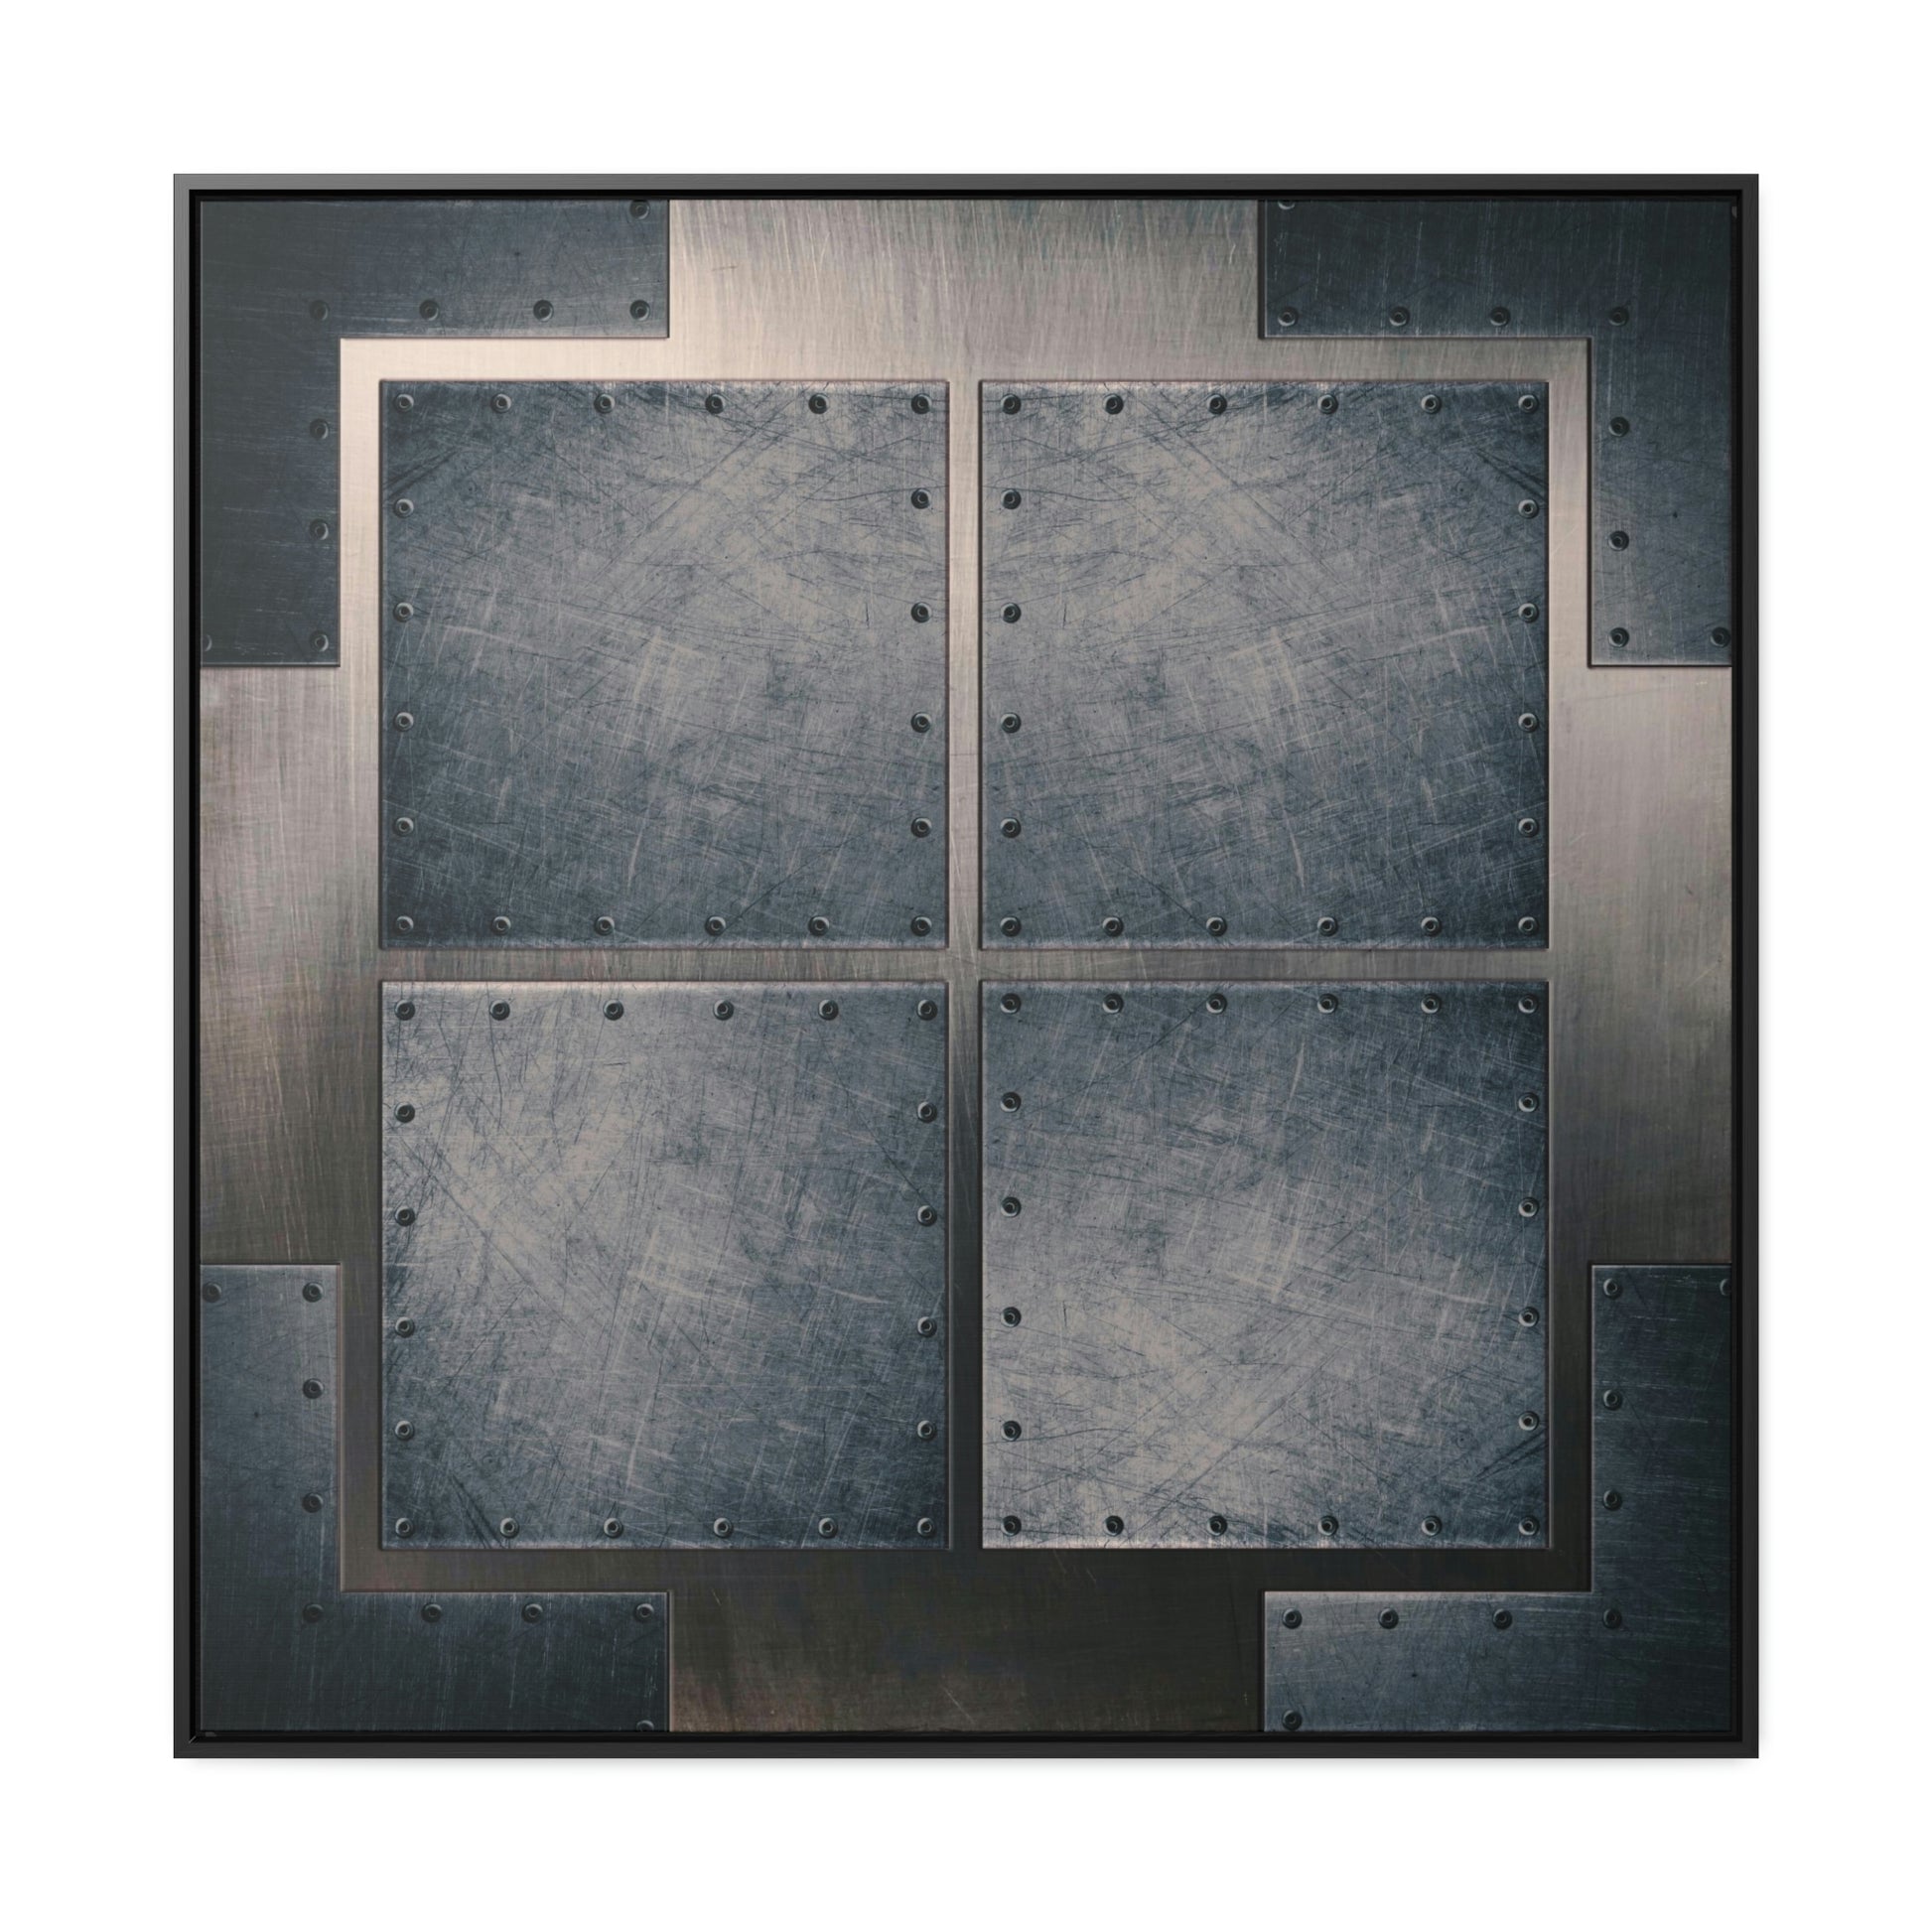 Industrial Themed Wall Decor - Distressed Steel Sheets Print on Canvas in a Floating Frame 5 sizes available